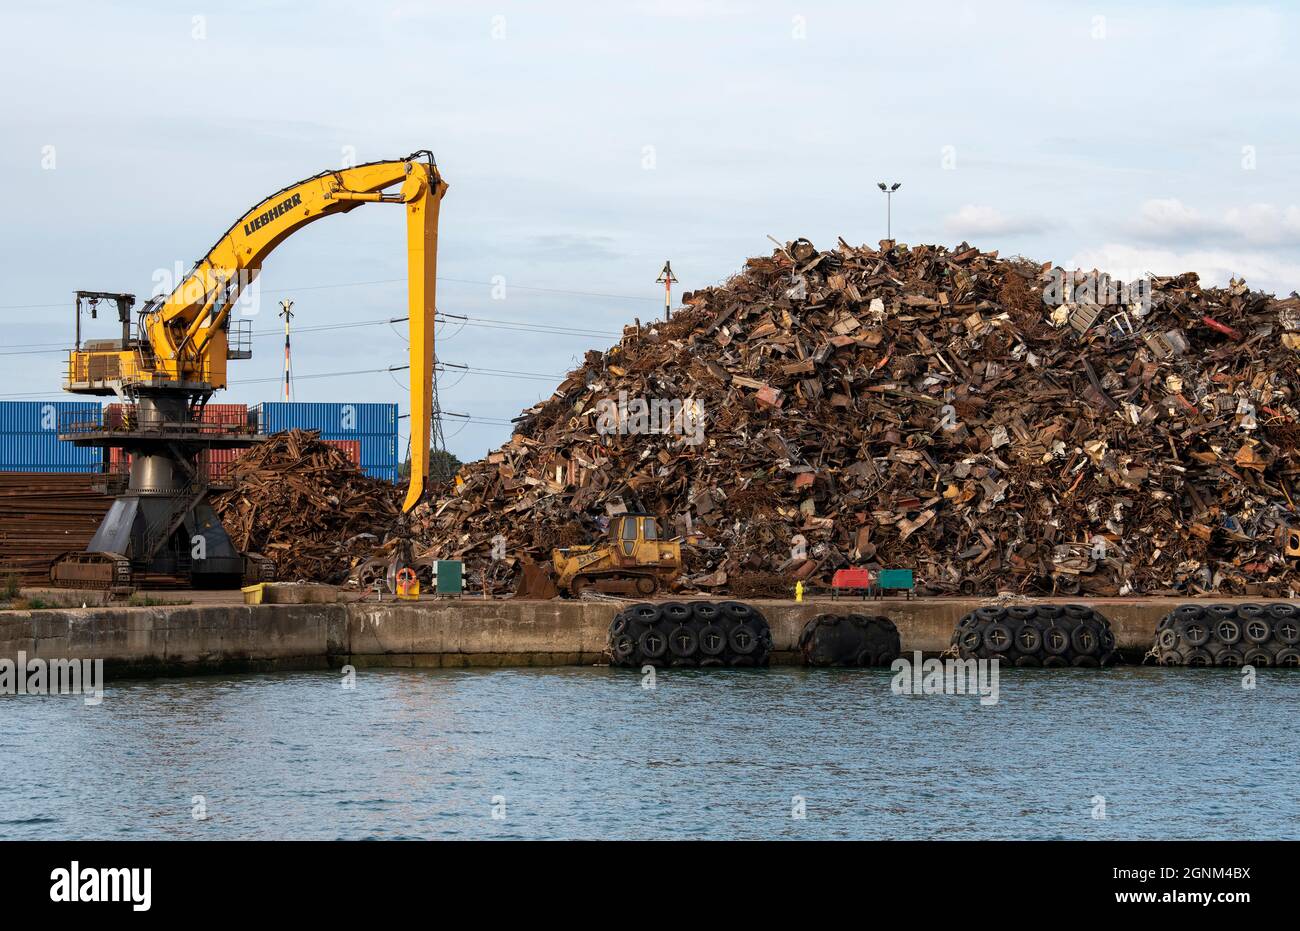 Southampton, England, UK. 2021.  A yellow crawler excavator machine on a dockside moving scrap metal  before loading onto a cargo ship for exporting. Stock Photo